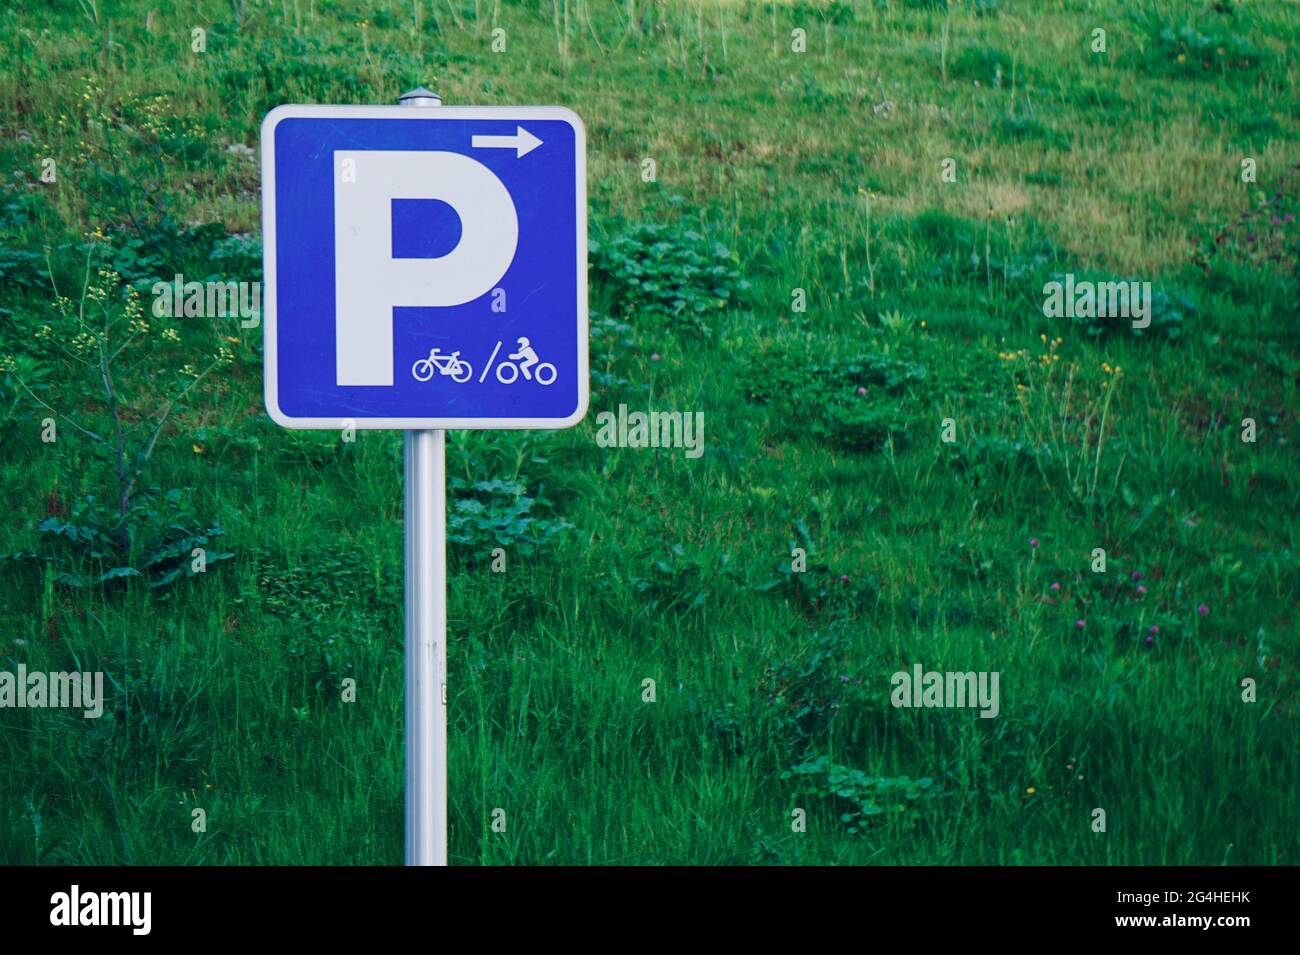 Parking sign for cyclists on the background of green grass Stock Photo